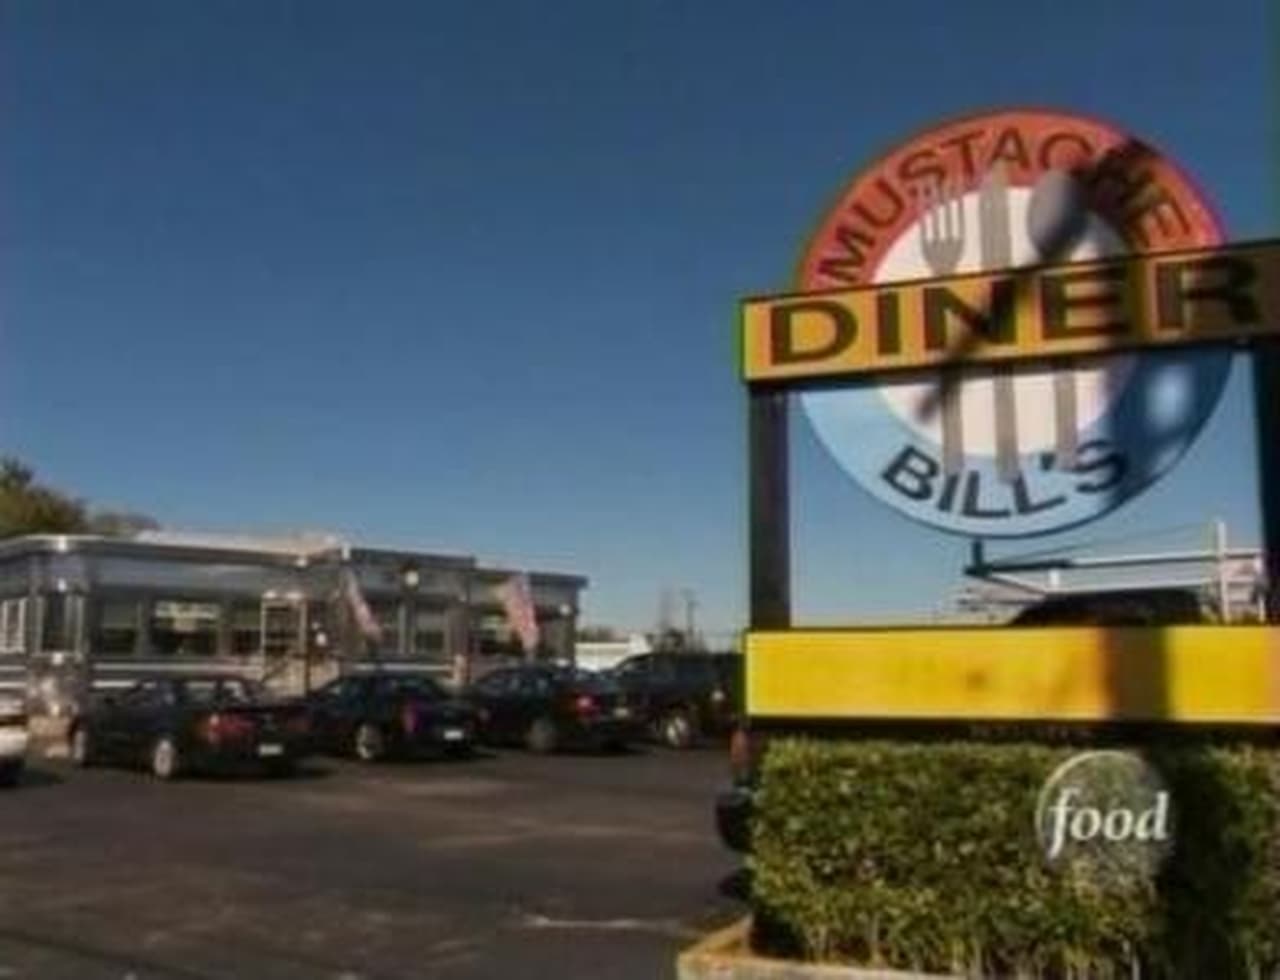 Diners, Drive-Ins and Dives - Season 2 Episode 13 : The New Jersey Diner Tour